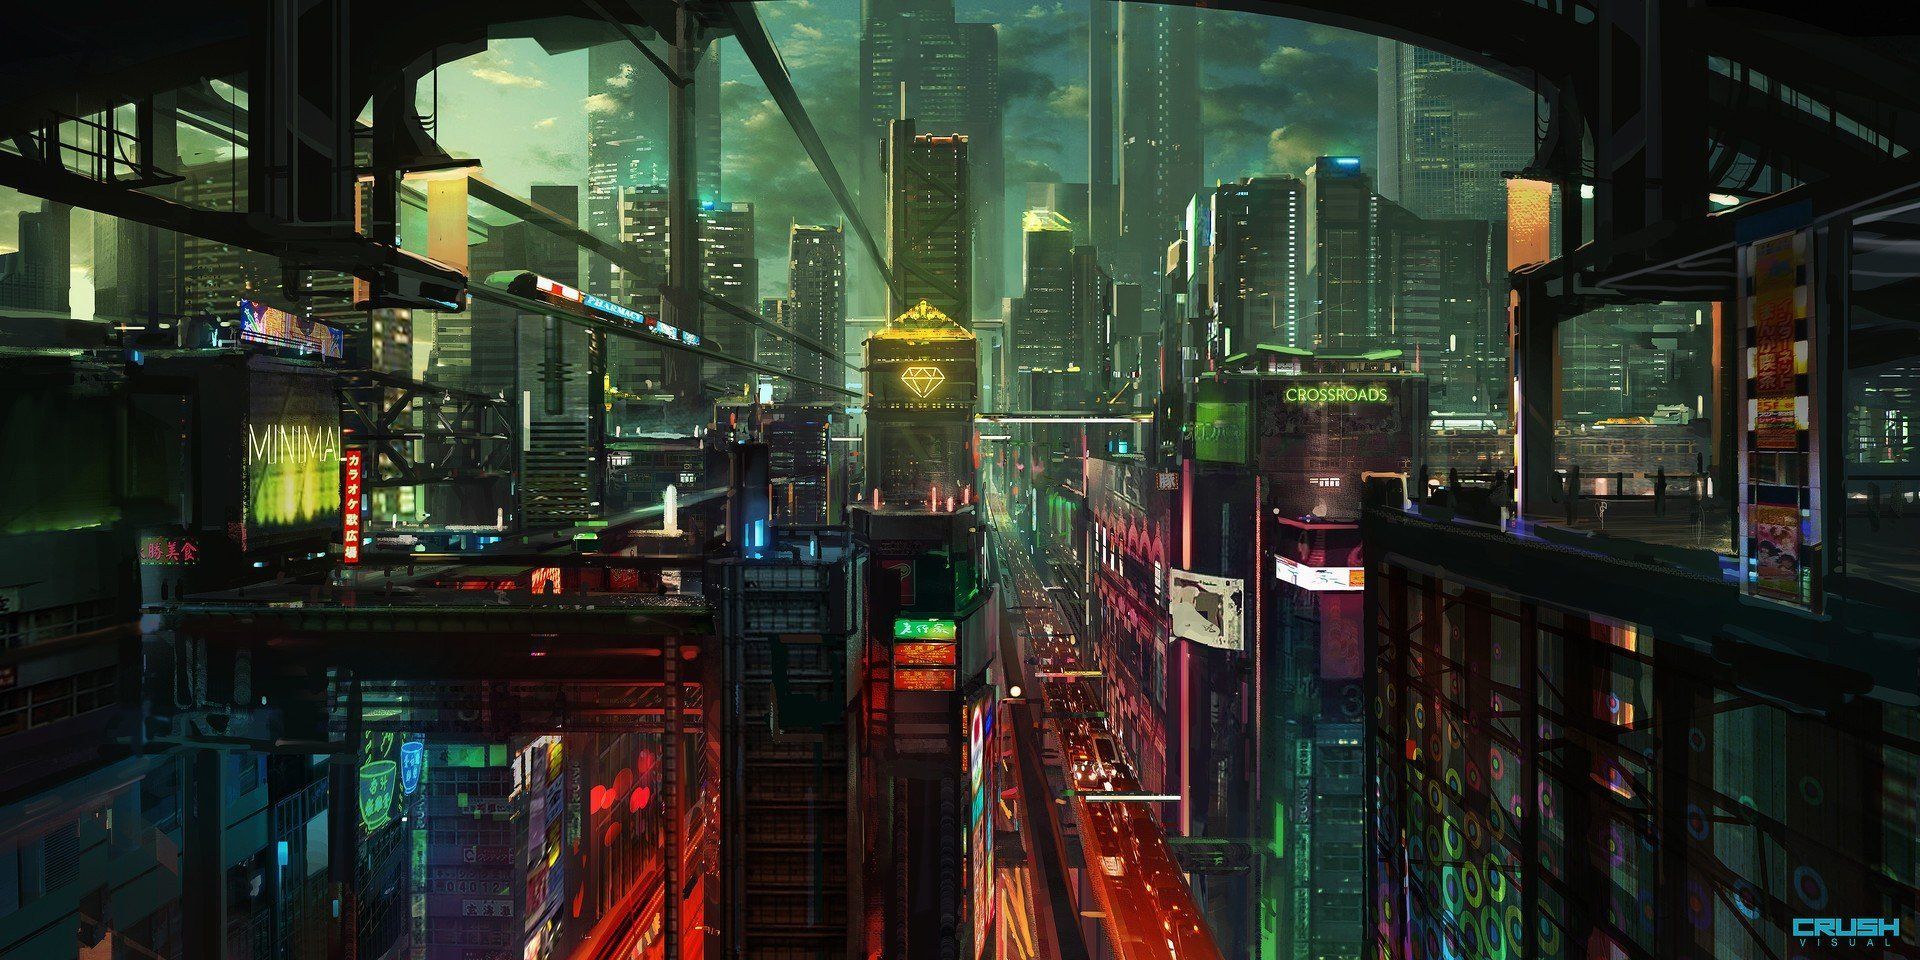 Cyberpunk City Background Images, HD Pictures and Wallpaper For Free  Download